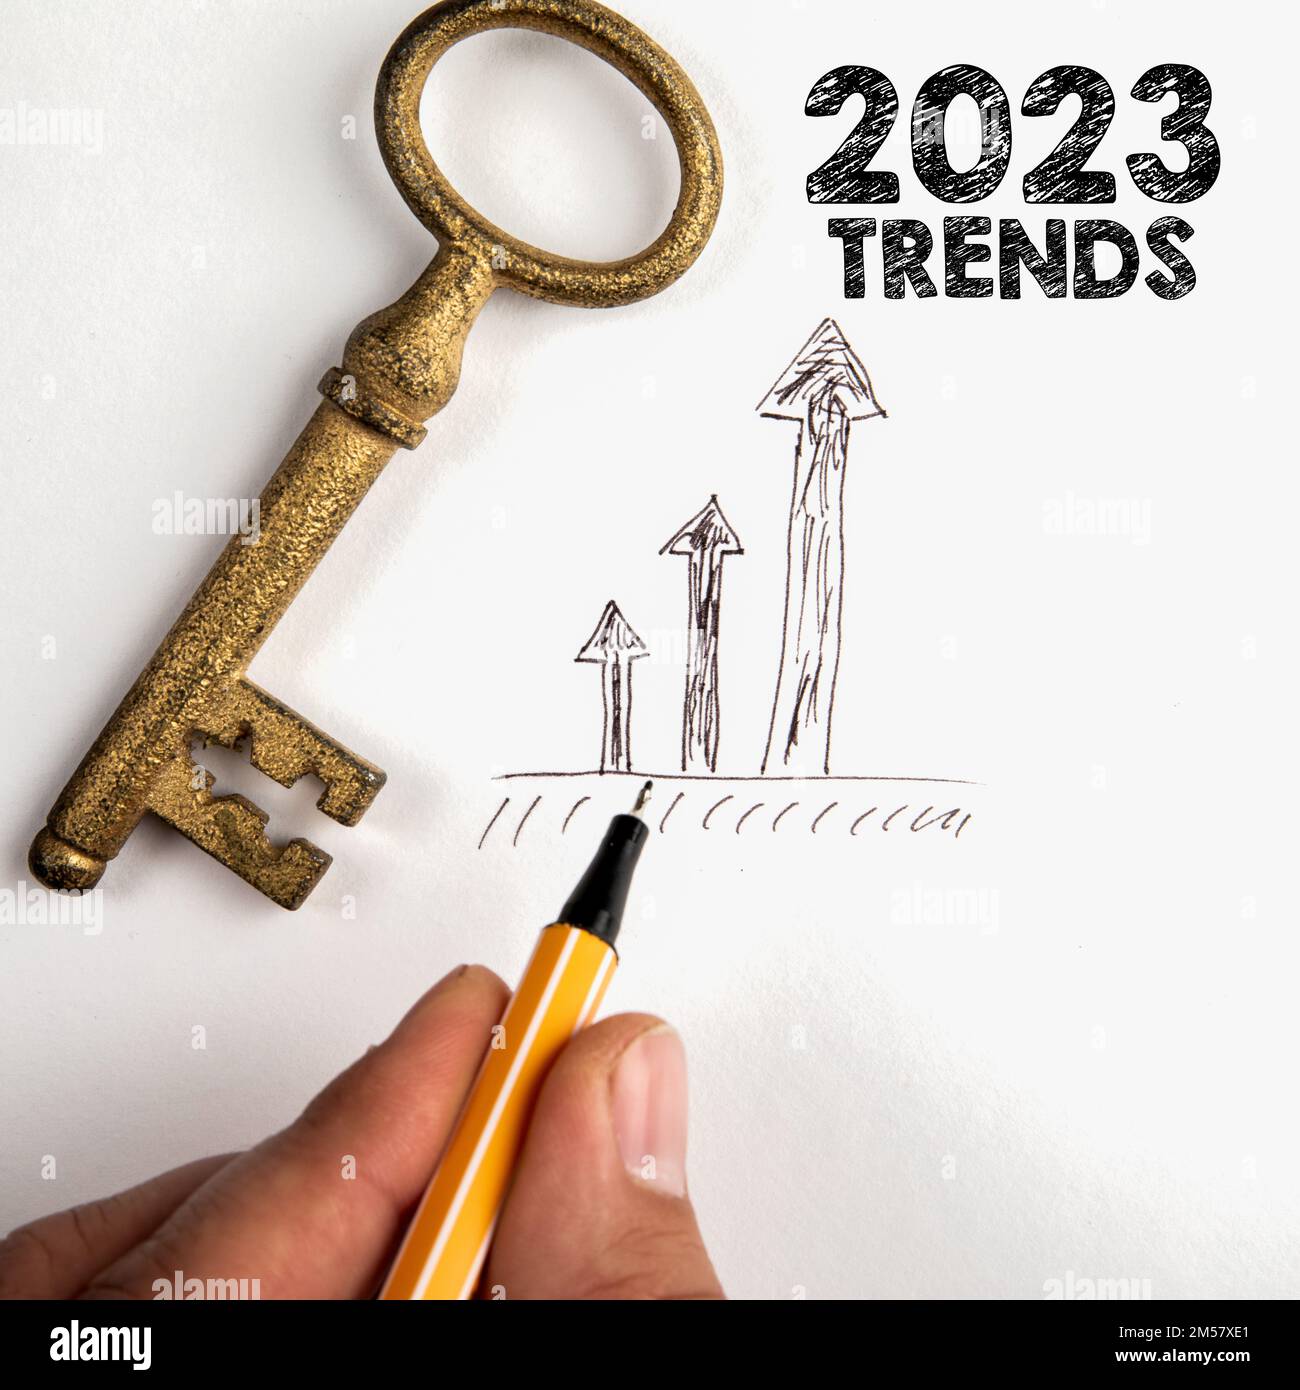 2023 TRENDS concept. Golden key and development arrows on white background. Stock Photo